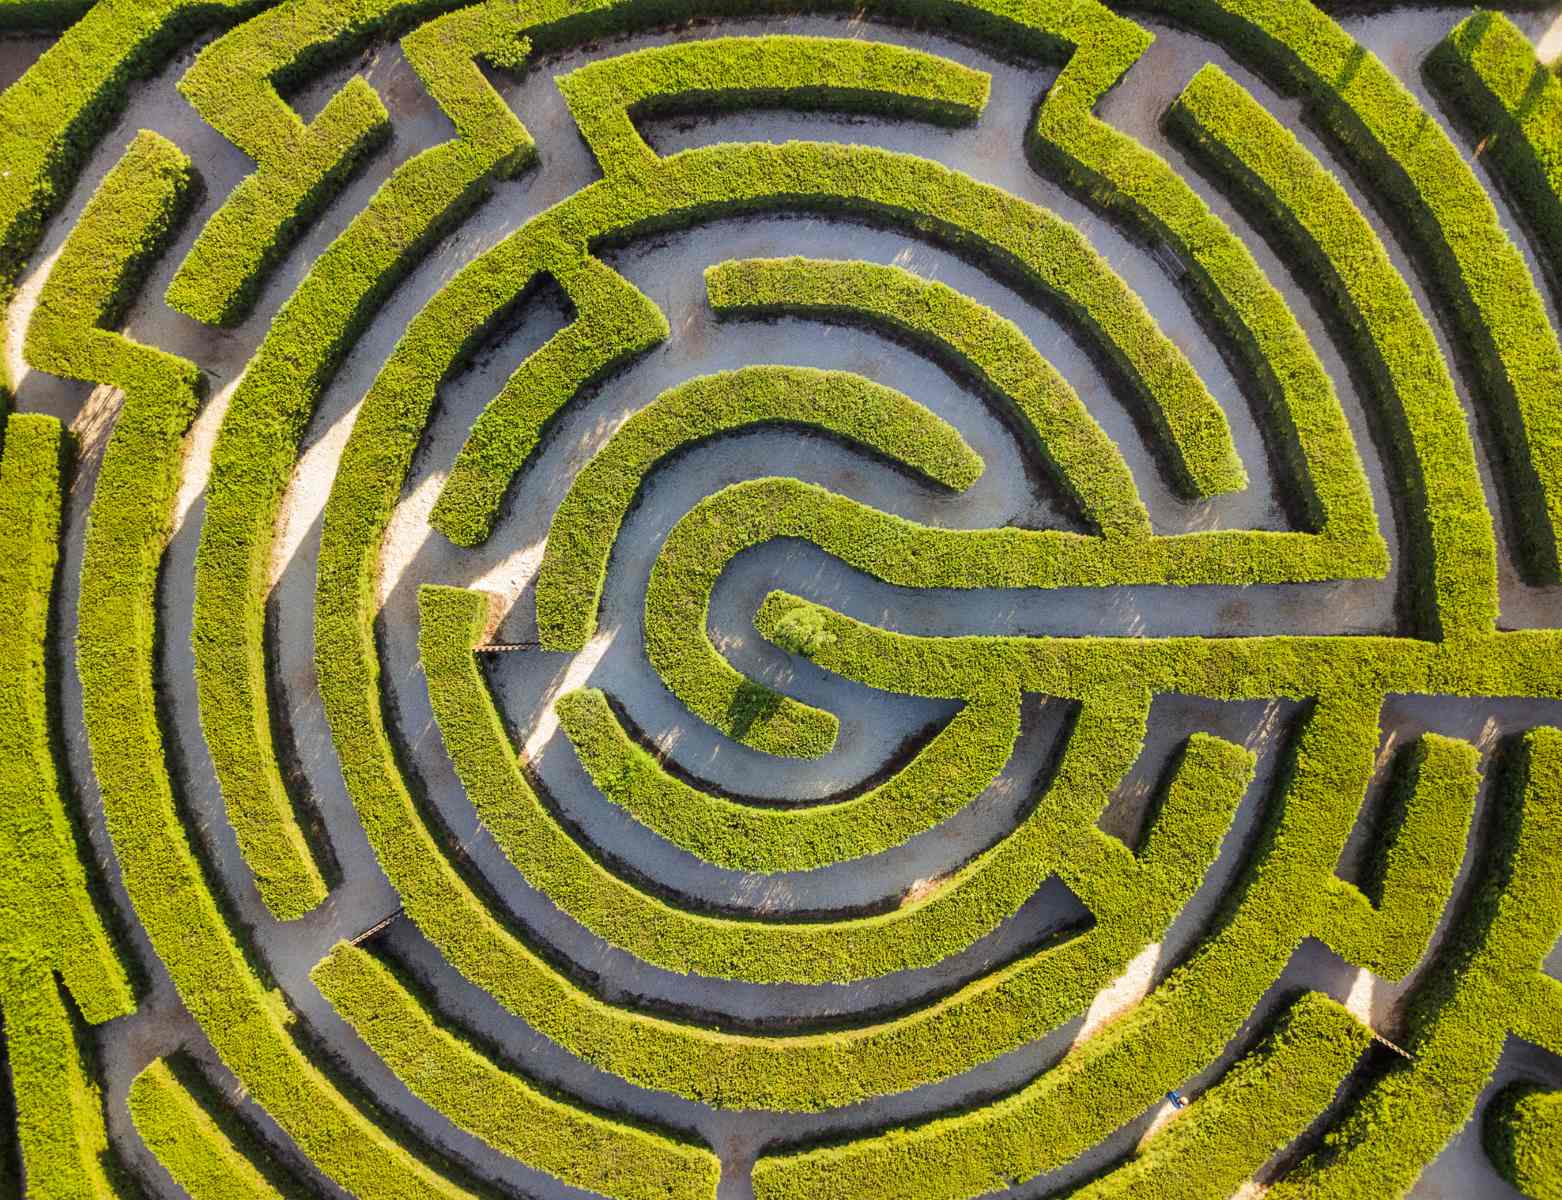 18 Labyrinth Facts - Facts.net